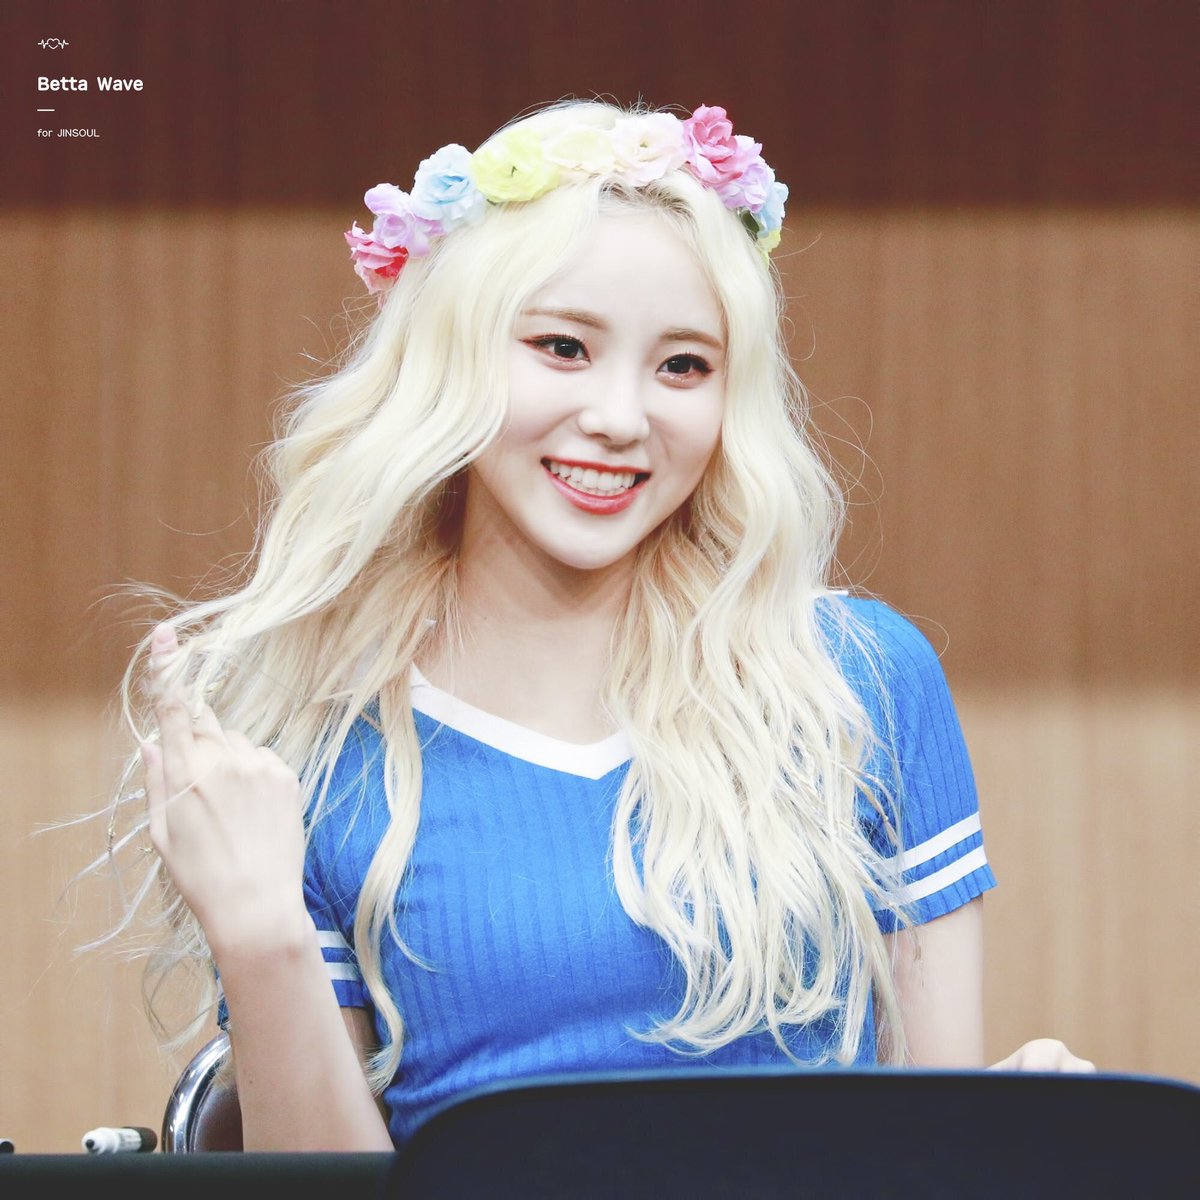 jinsoul as star from star vs the forces of evil